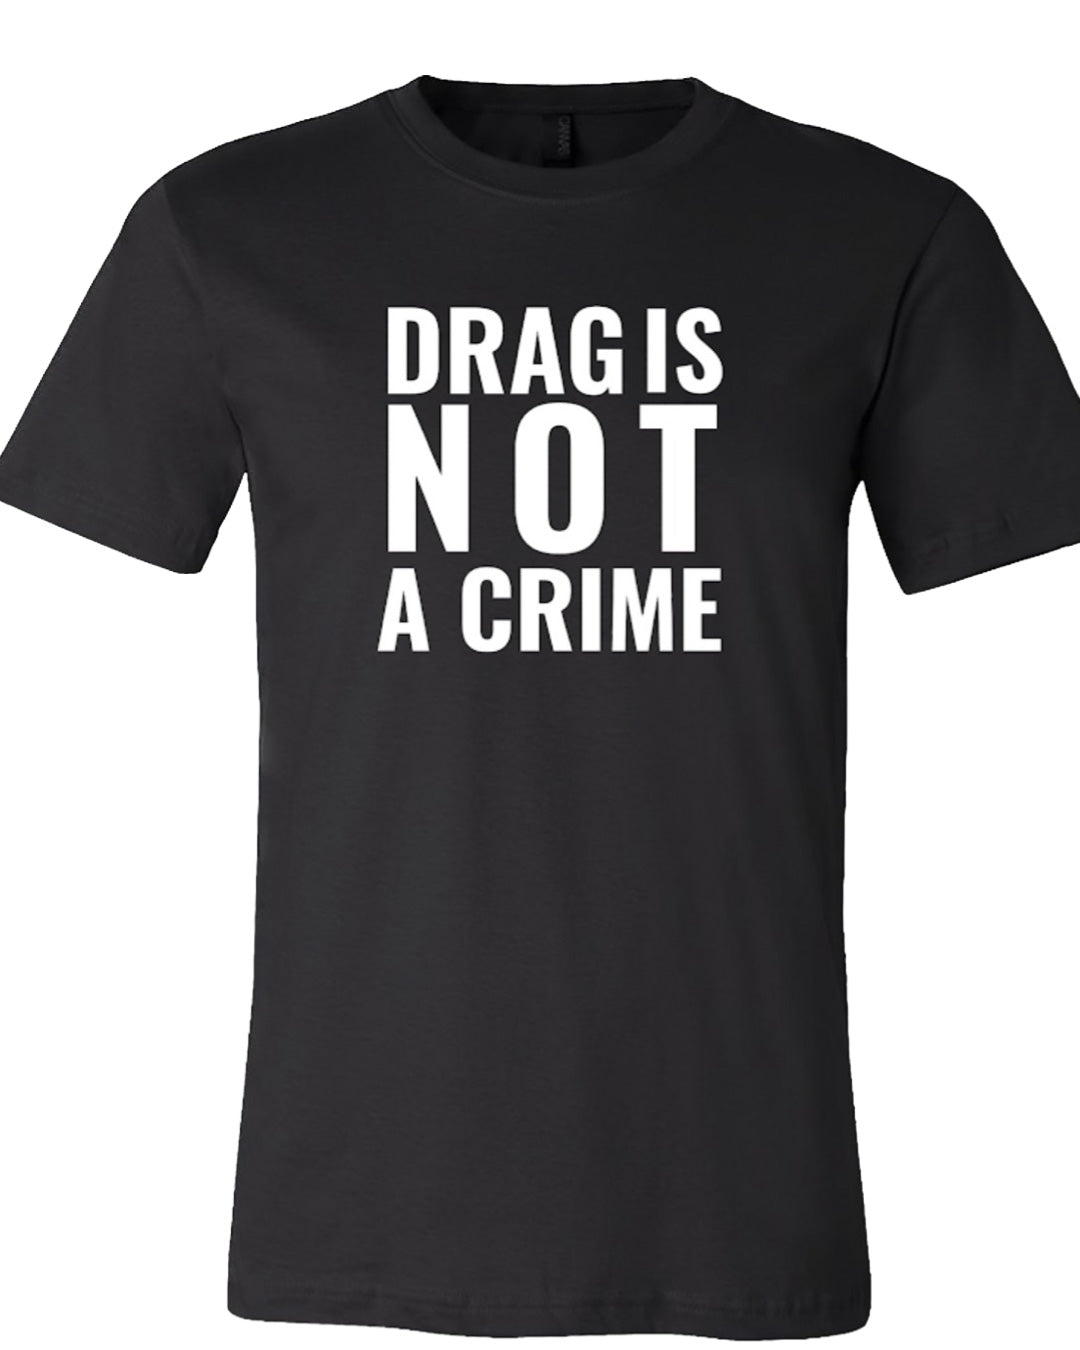 DRAG IS NOT A CRIME